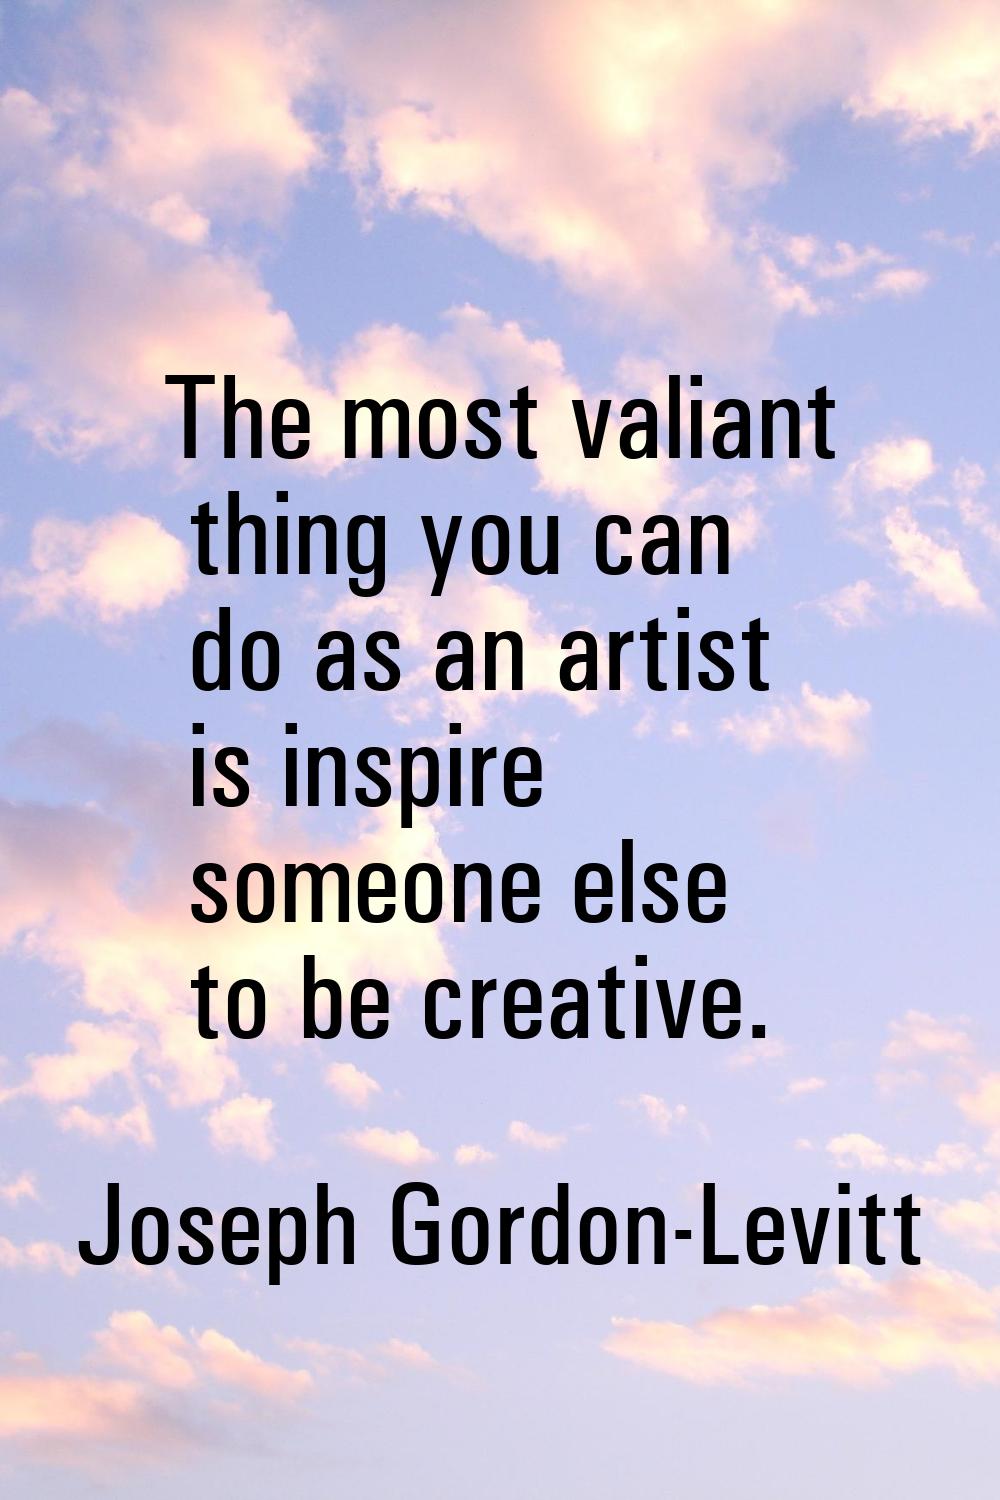 The most valiant thing you can do as an artist is inspire someone else to be creative.